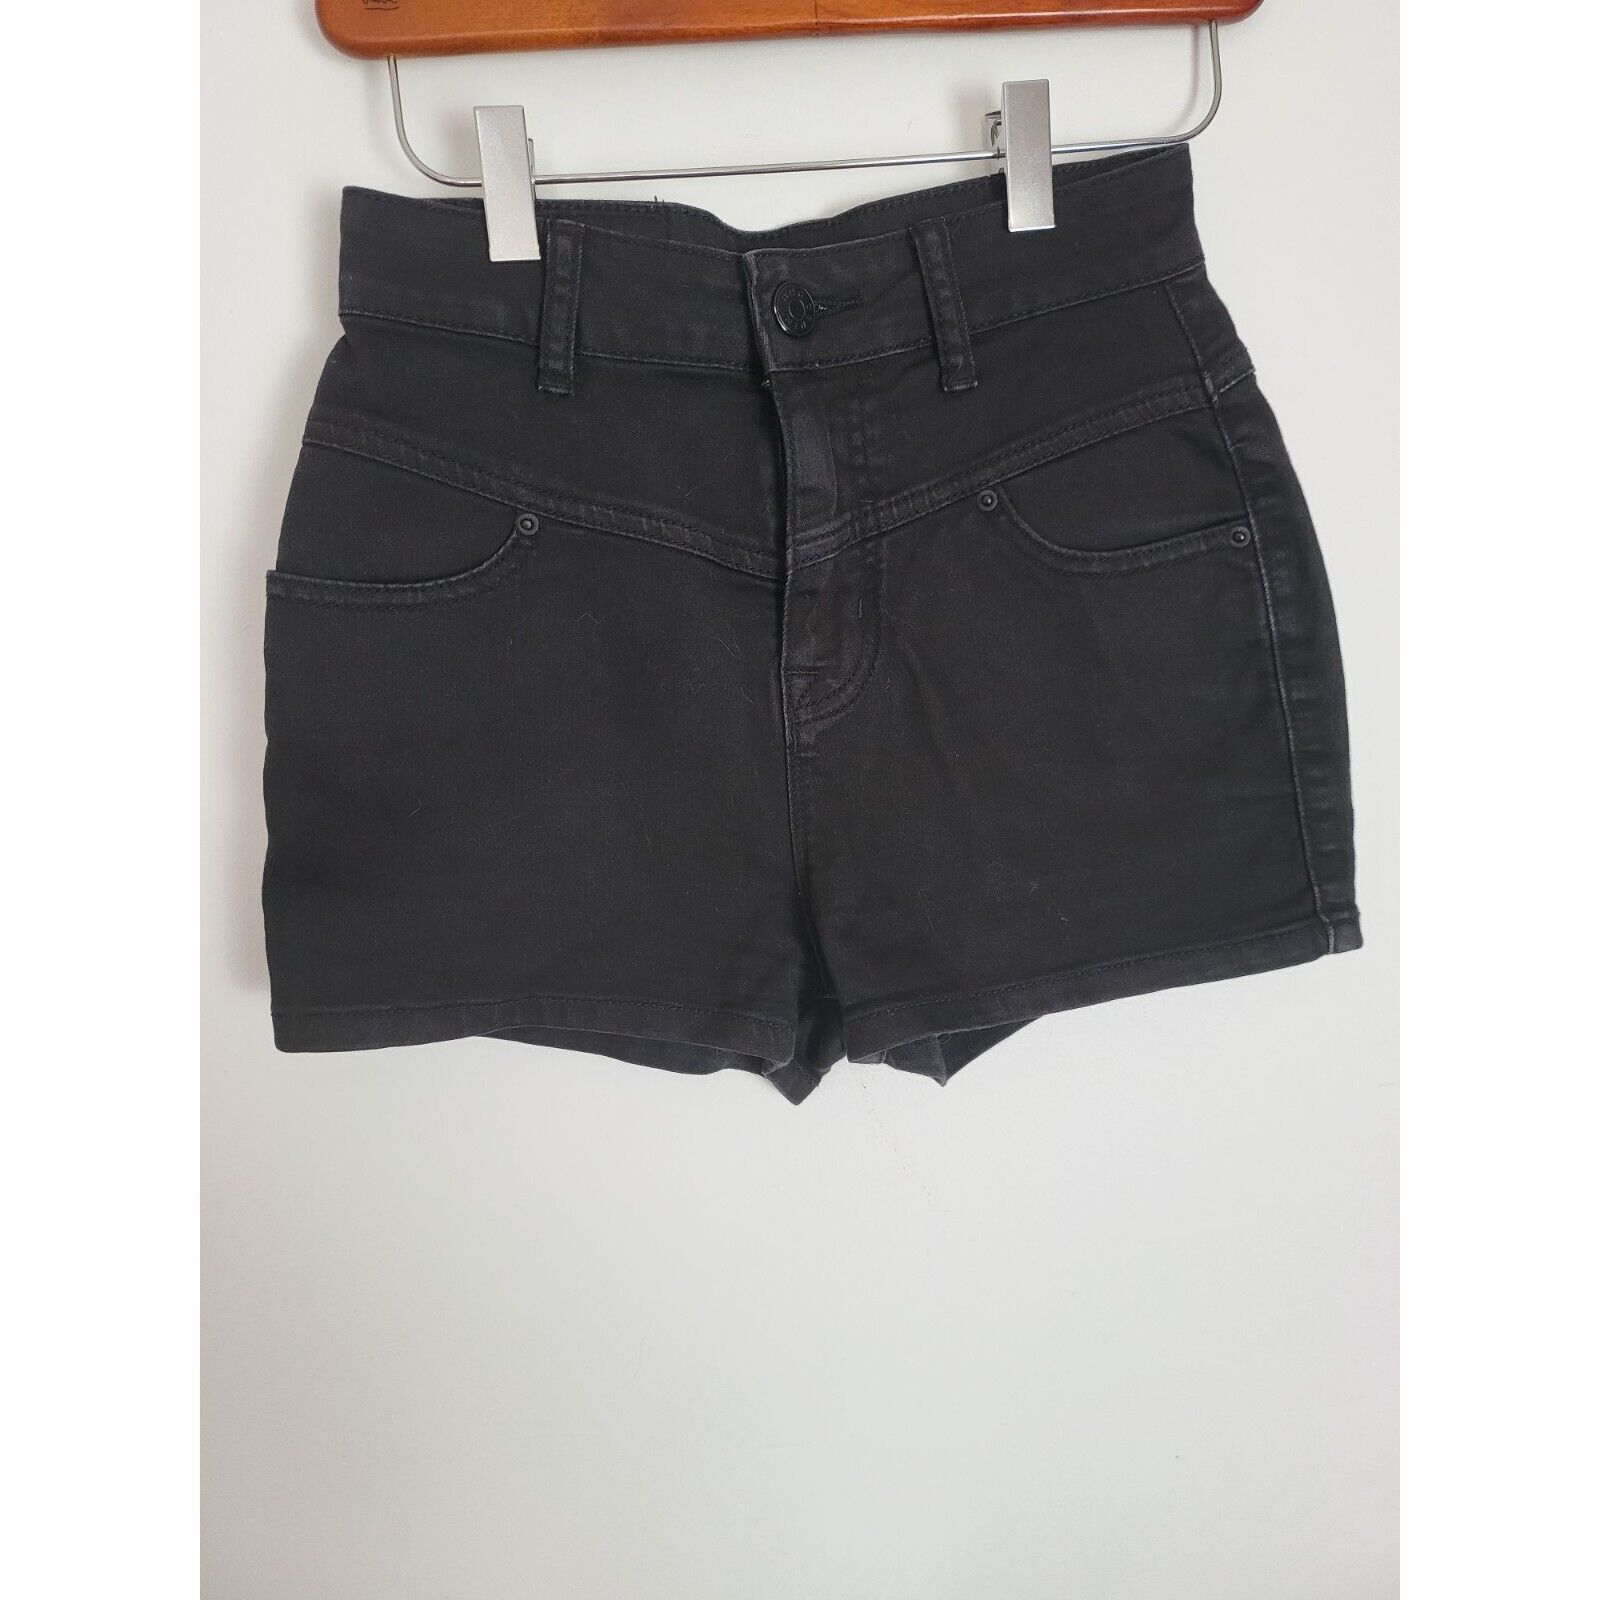 Primary image for BDG Urban Outfitters Seam Shorts 25 Womens Super High Rise Black Pockets